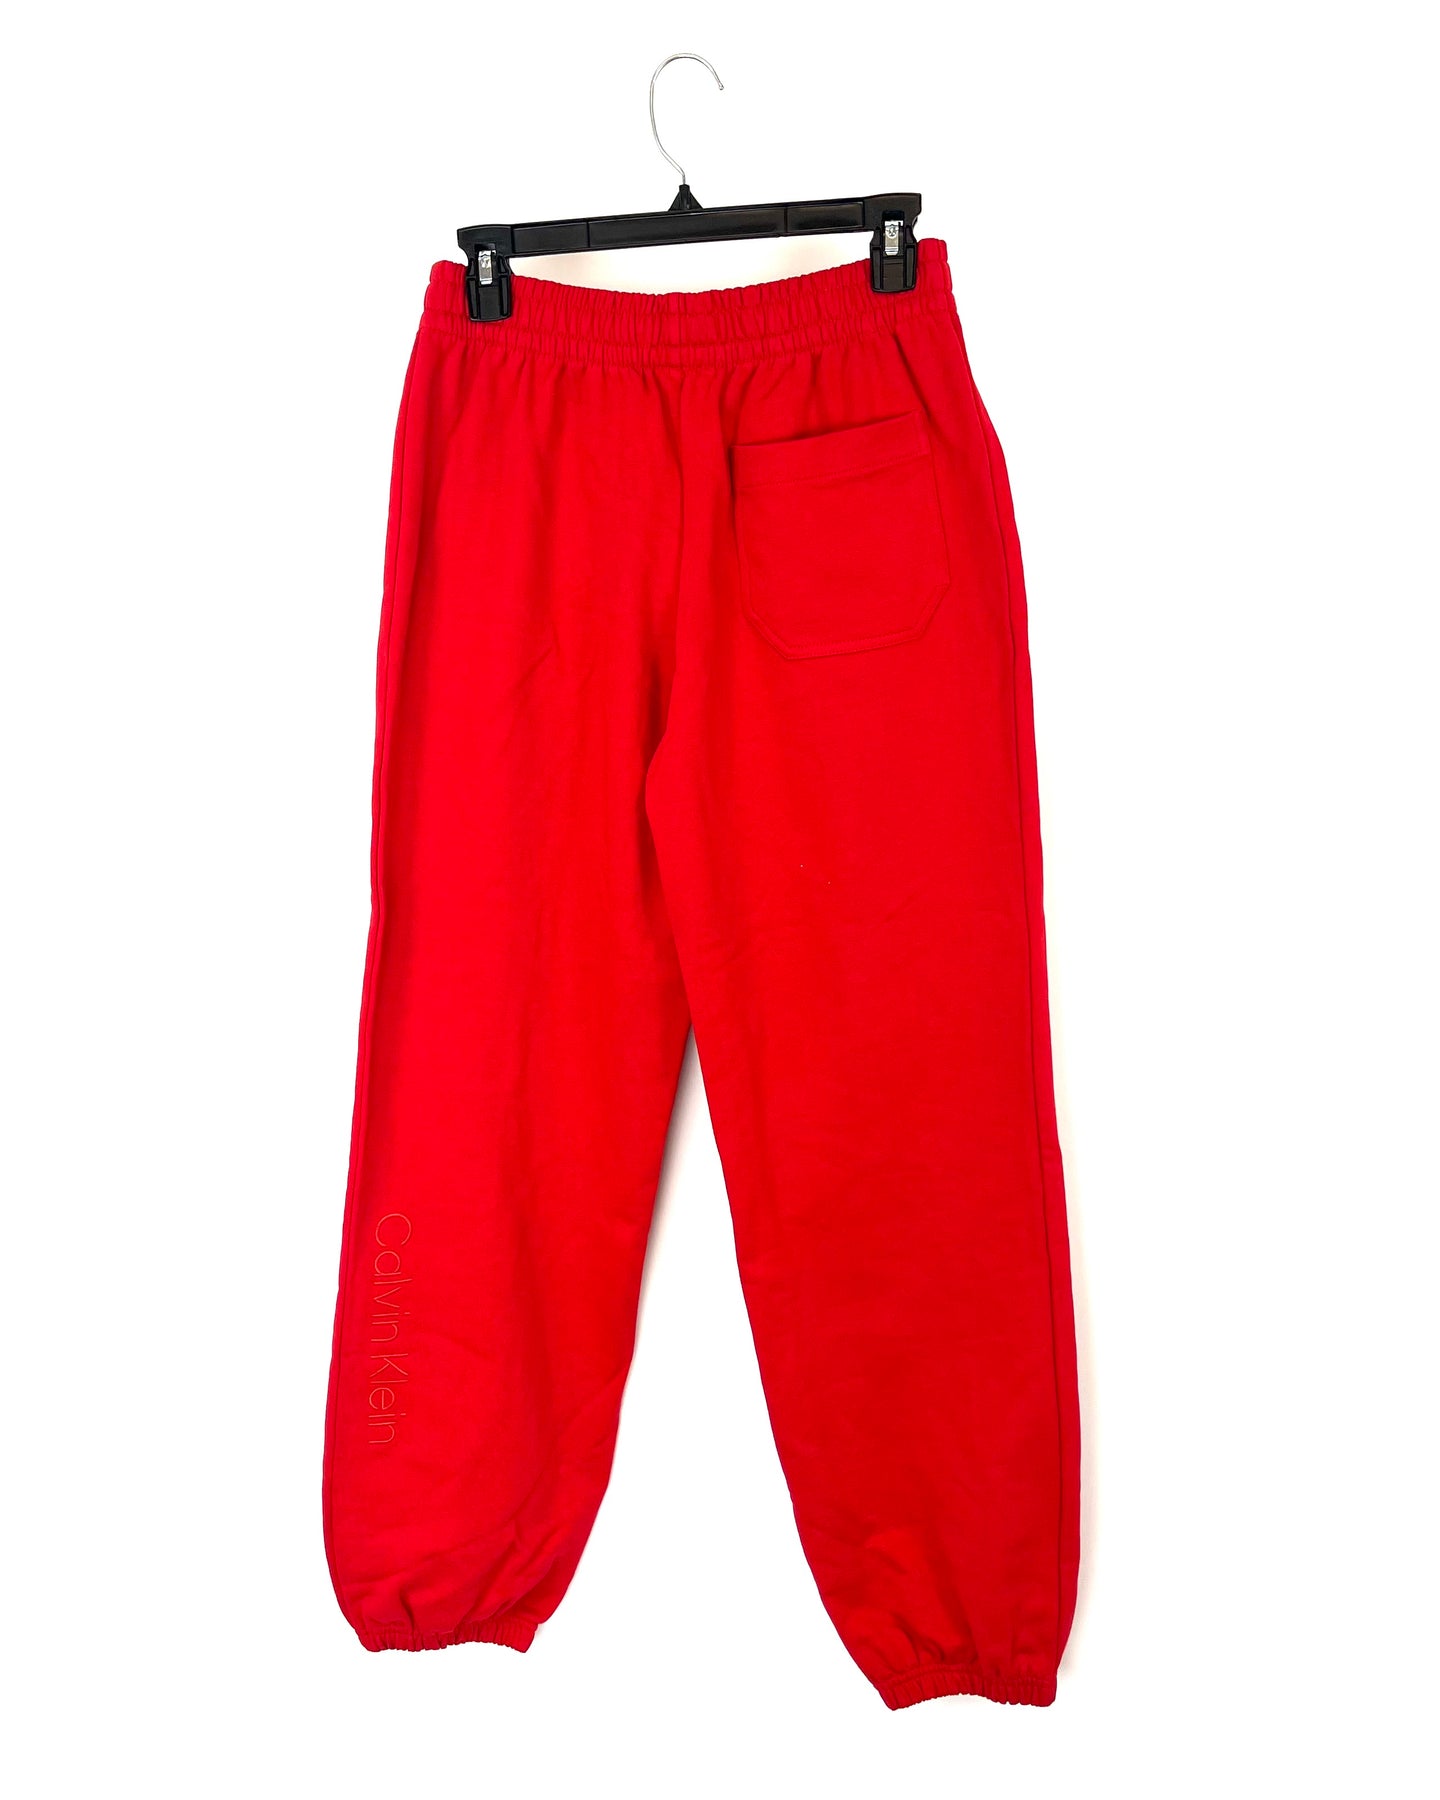 Fashion Foundation Calvin Athletic – The Klein - Sweatpants Red Small